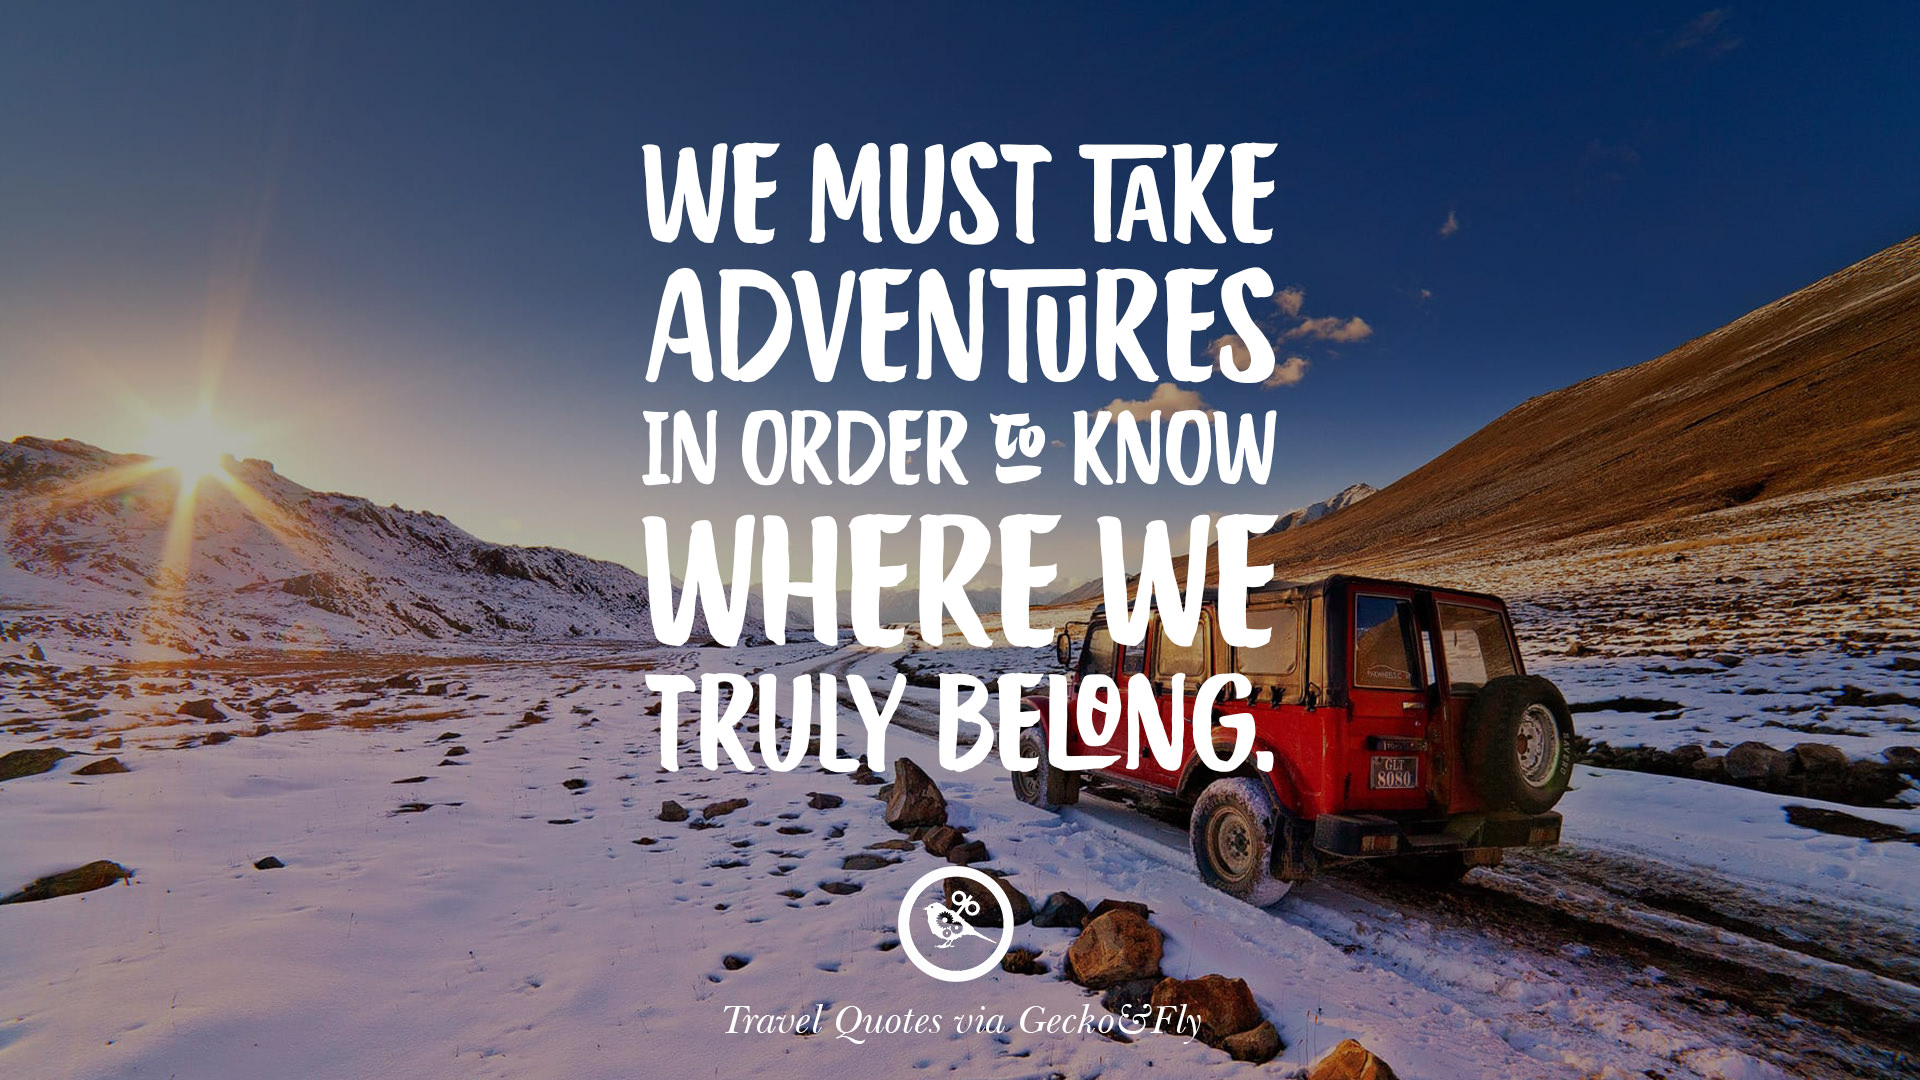 meaning of travel and adventure